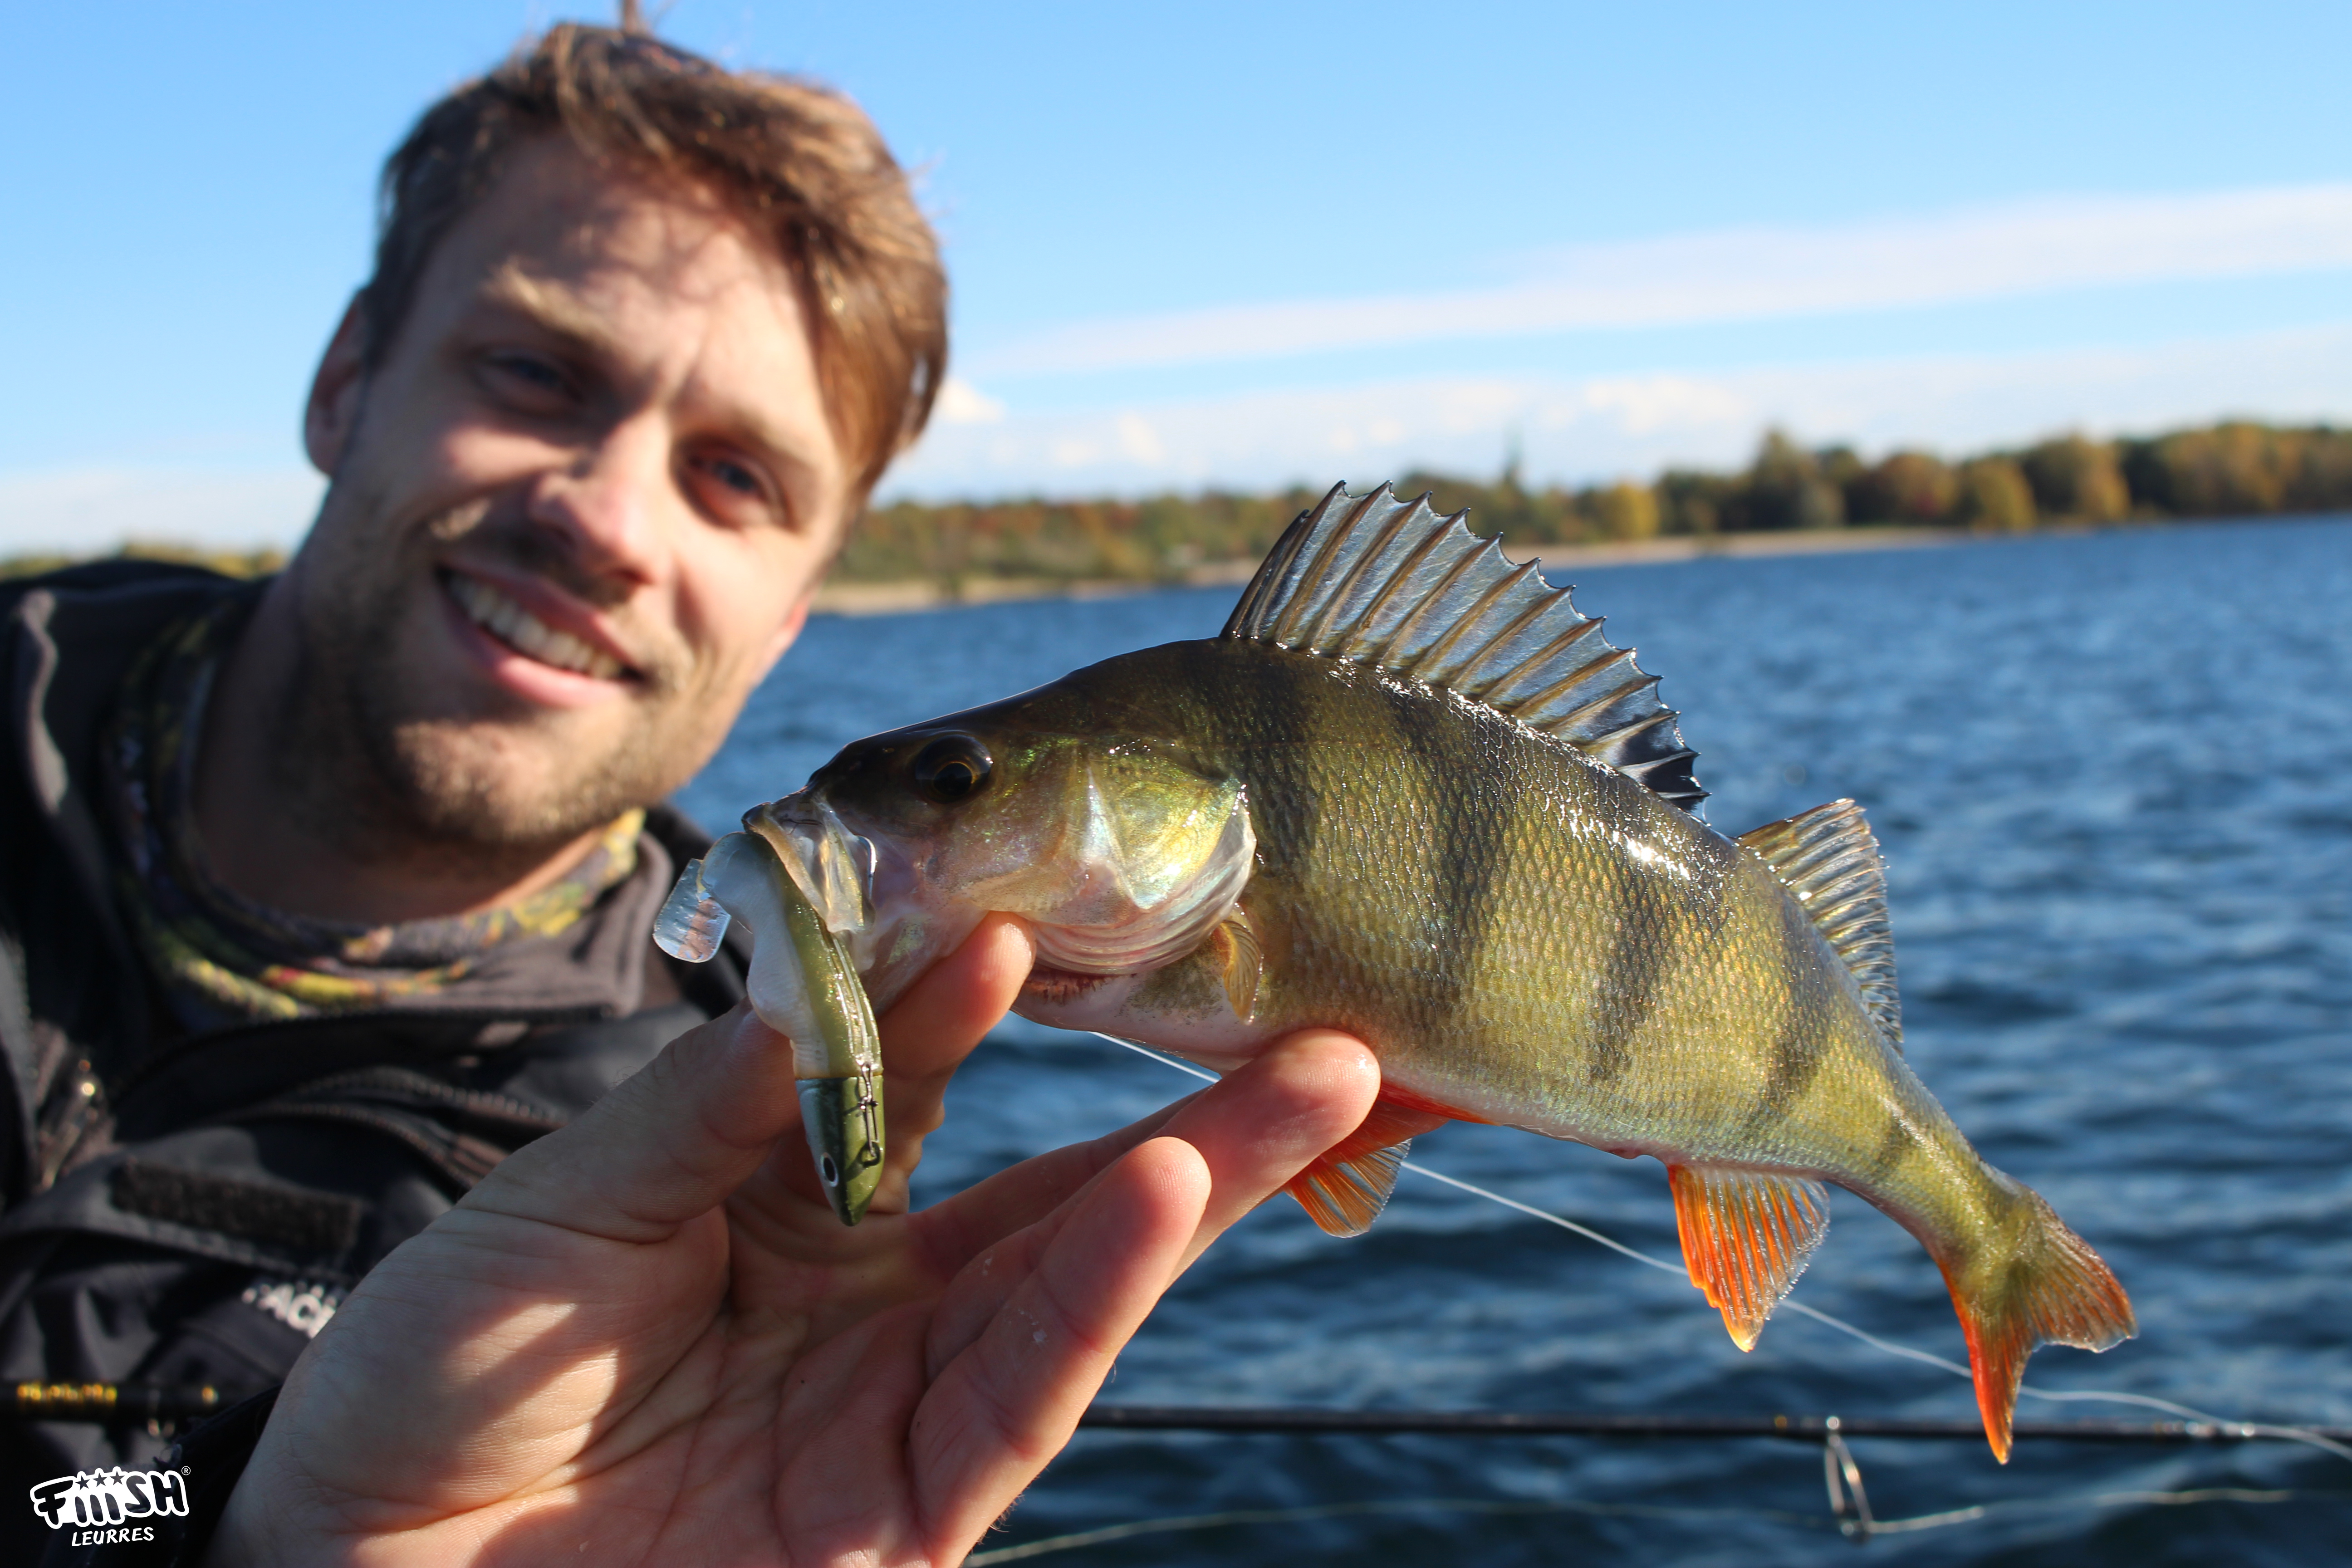 Marvin / Perch inferno : How to maximized our catches